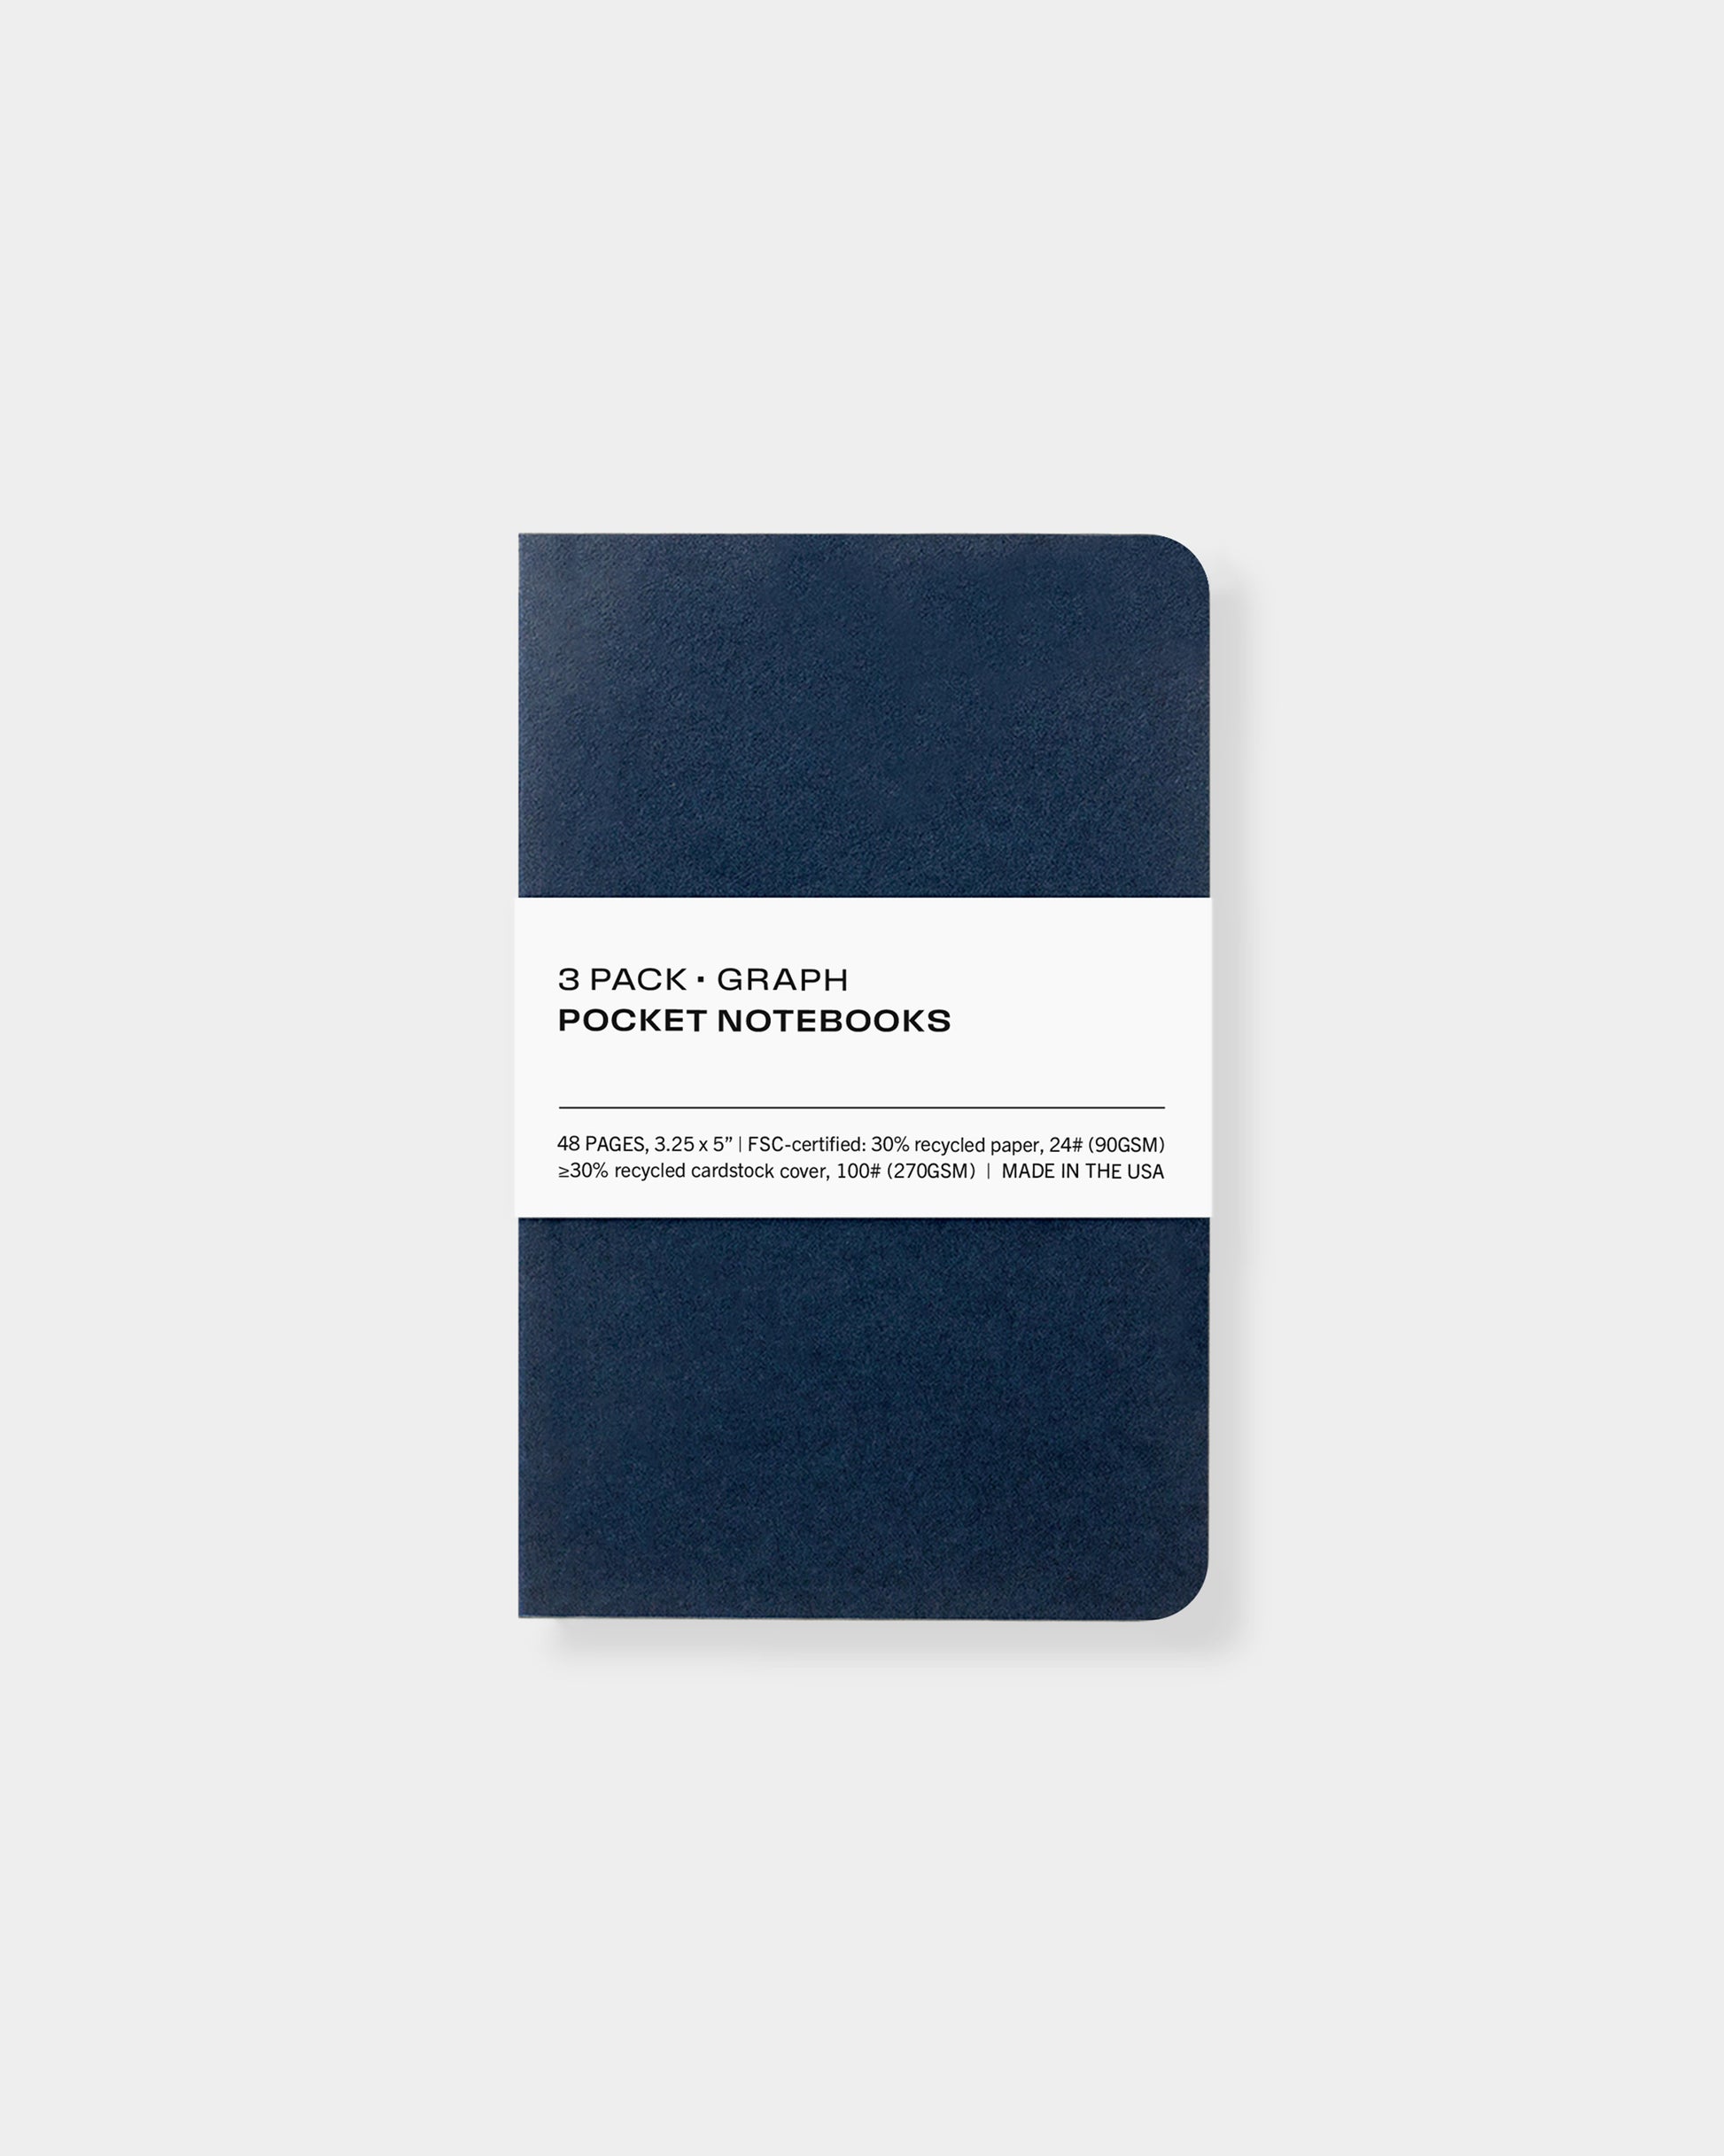 3 pack pocket notebooks, 3.25 x 5", made with eco-friendly papers. Graph paper pages, navy color way.